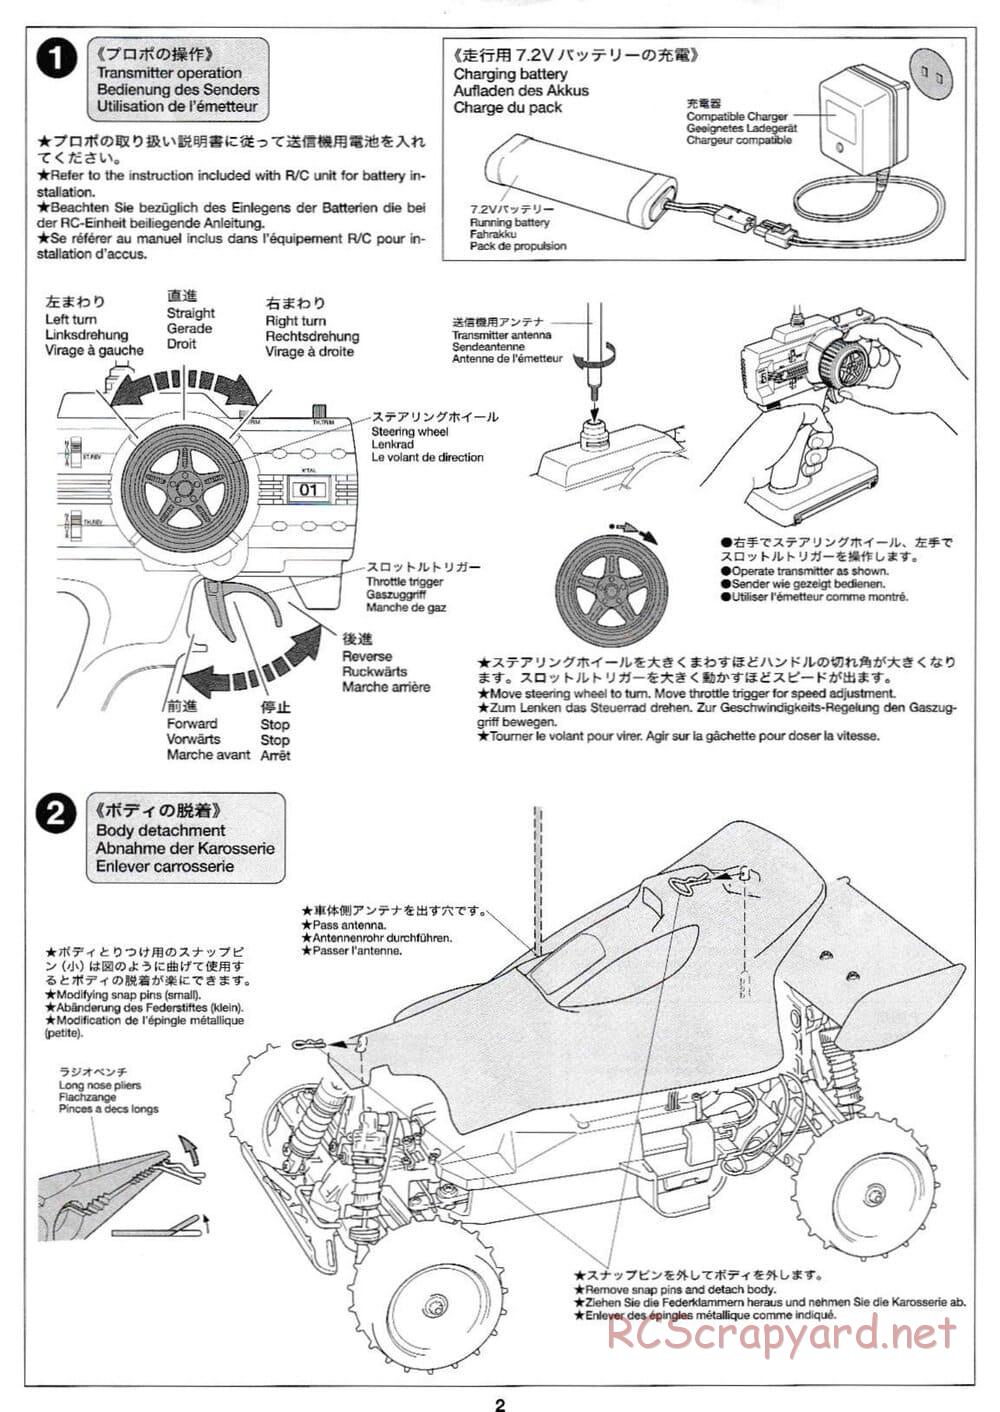 Tamiya - XB Neo Top-Force - DF-01 Chassis - Manual - Page 2